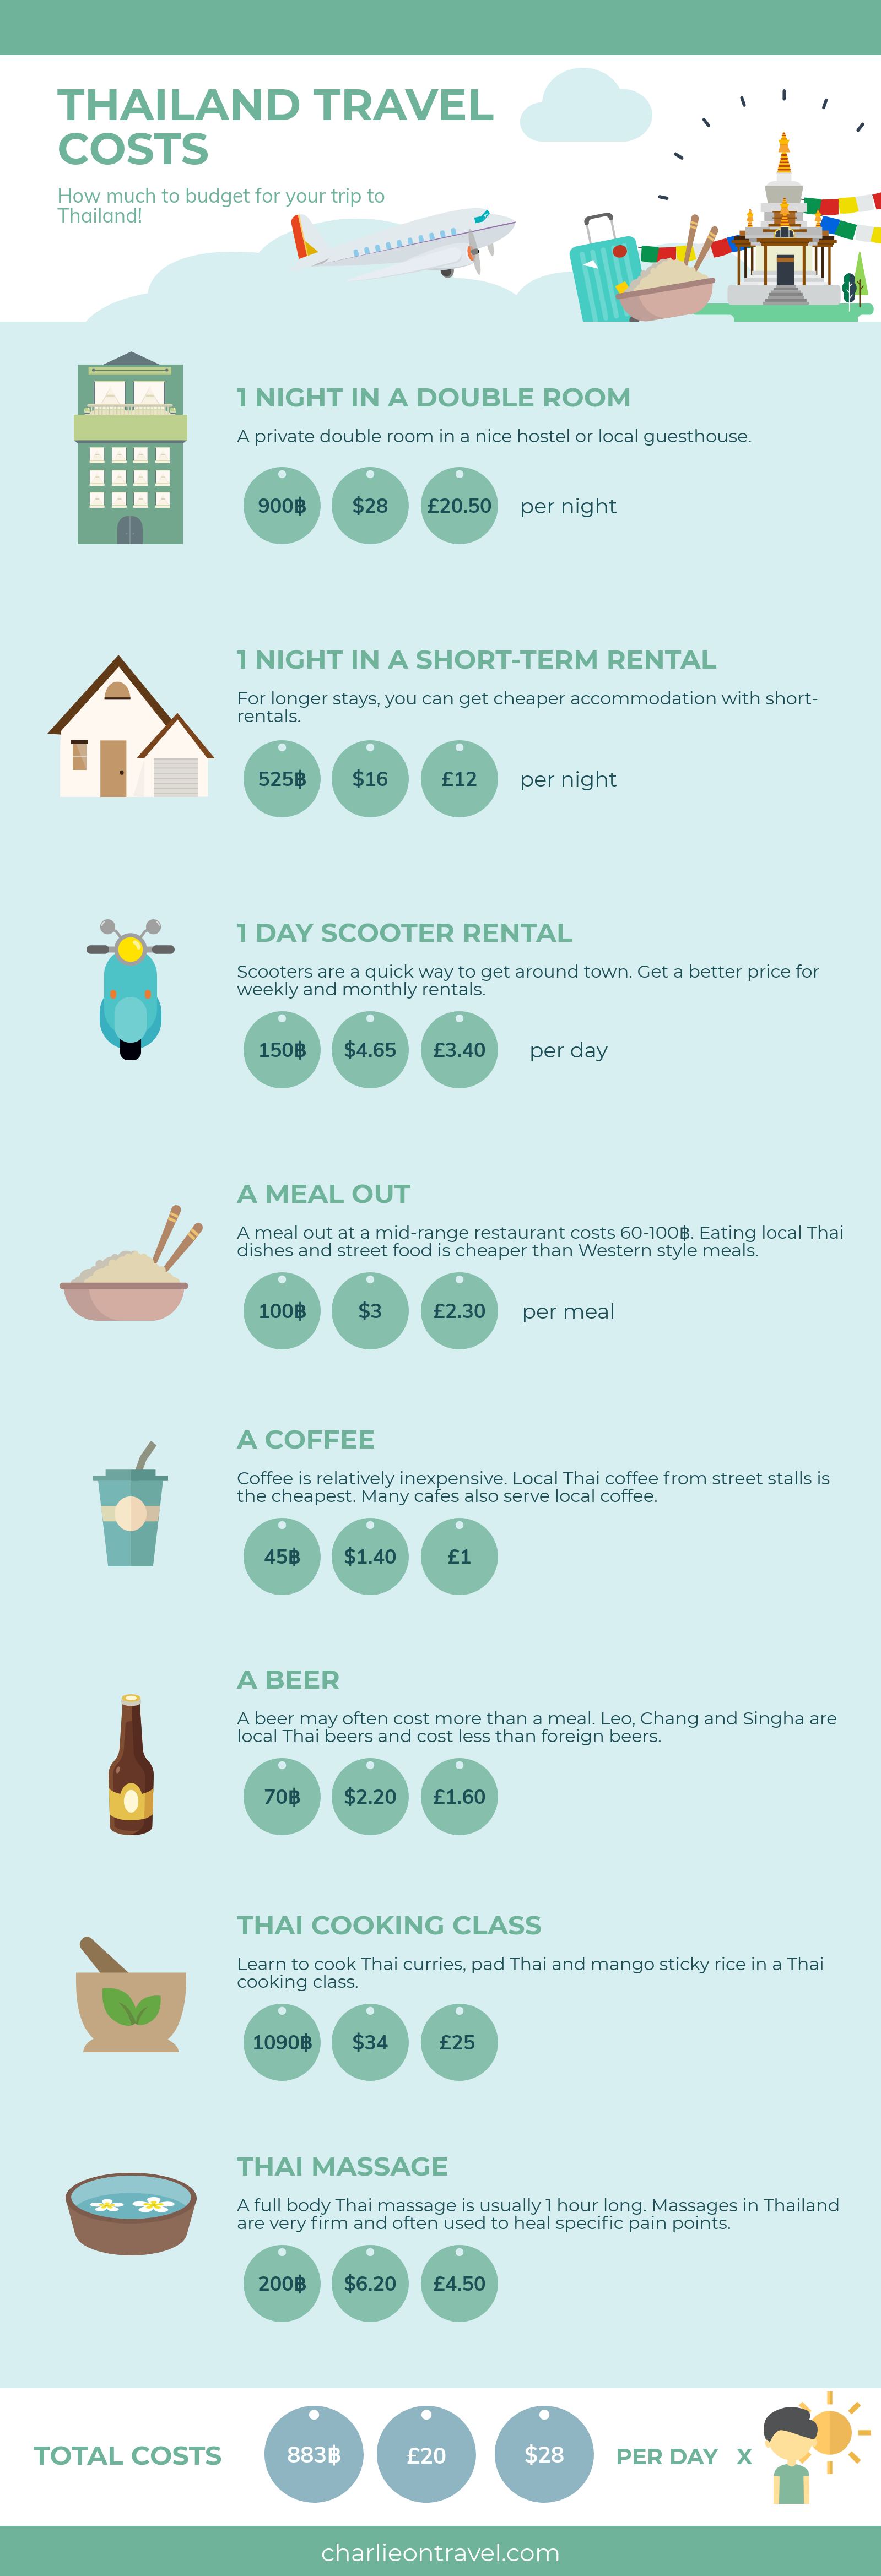 Thailand Travel Costs Infographic - Thailand Budget Per Day - Charlie on Travel